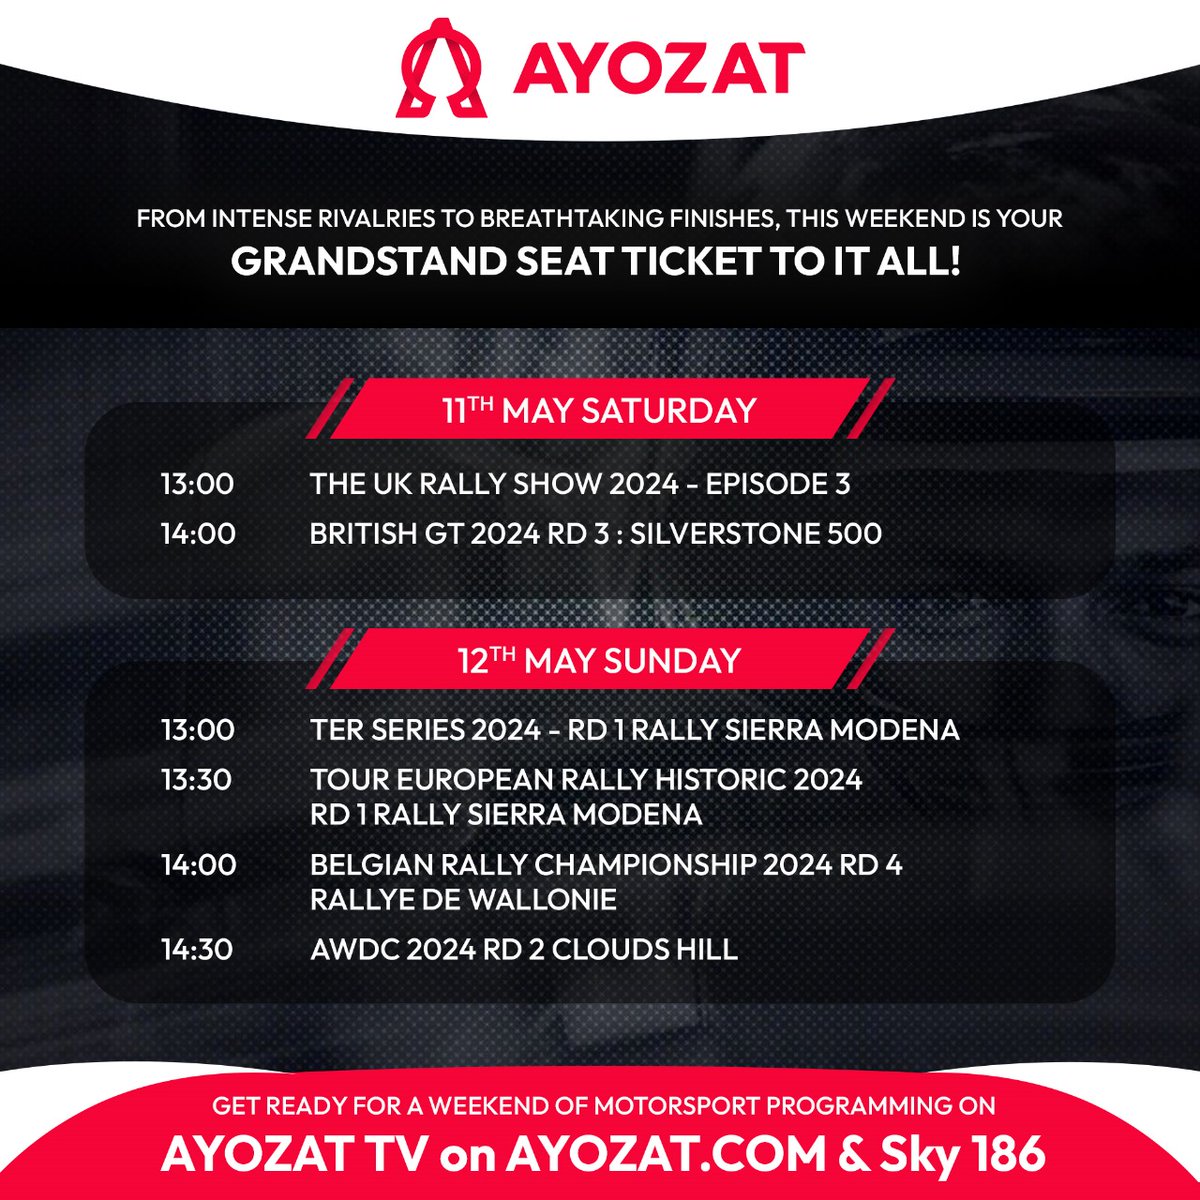 Buckle up for an action packed weekend! Don't miss the motorsport action starting from Saturday 1pm on AYOZAT TV on Sky 186 and ayozat.com. From high-speed races to thrilling showdowns, we've got your weekend covered!
#motorsport #cars #racing #action #weekendracing